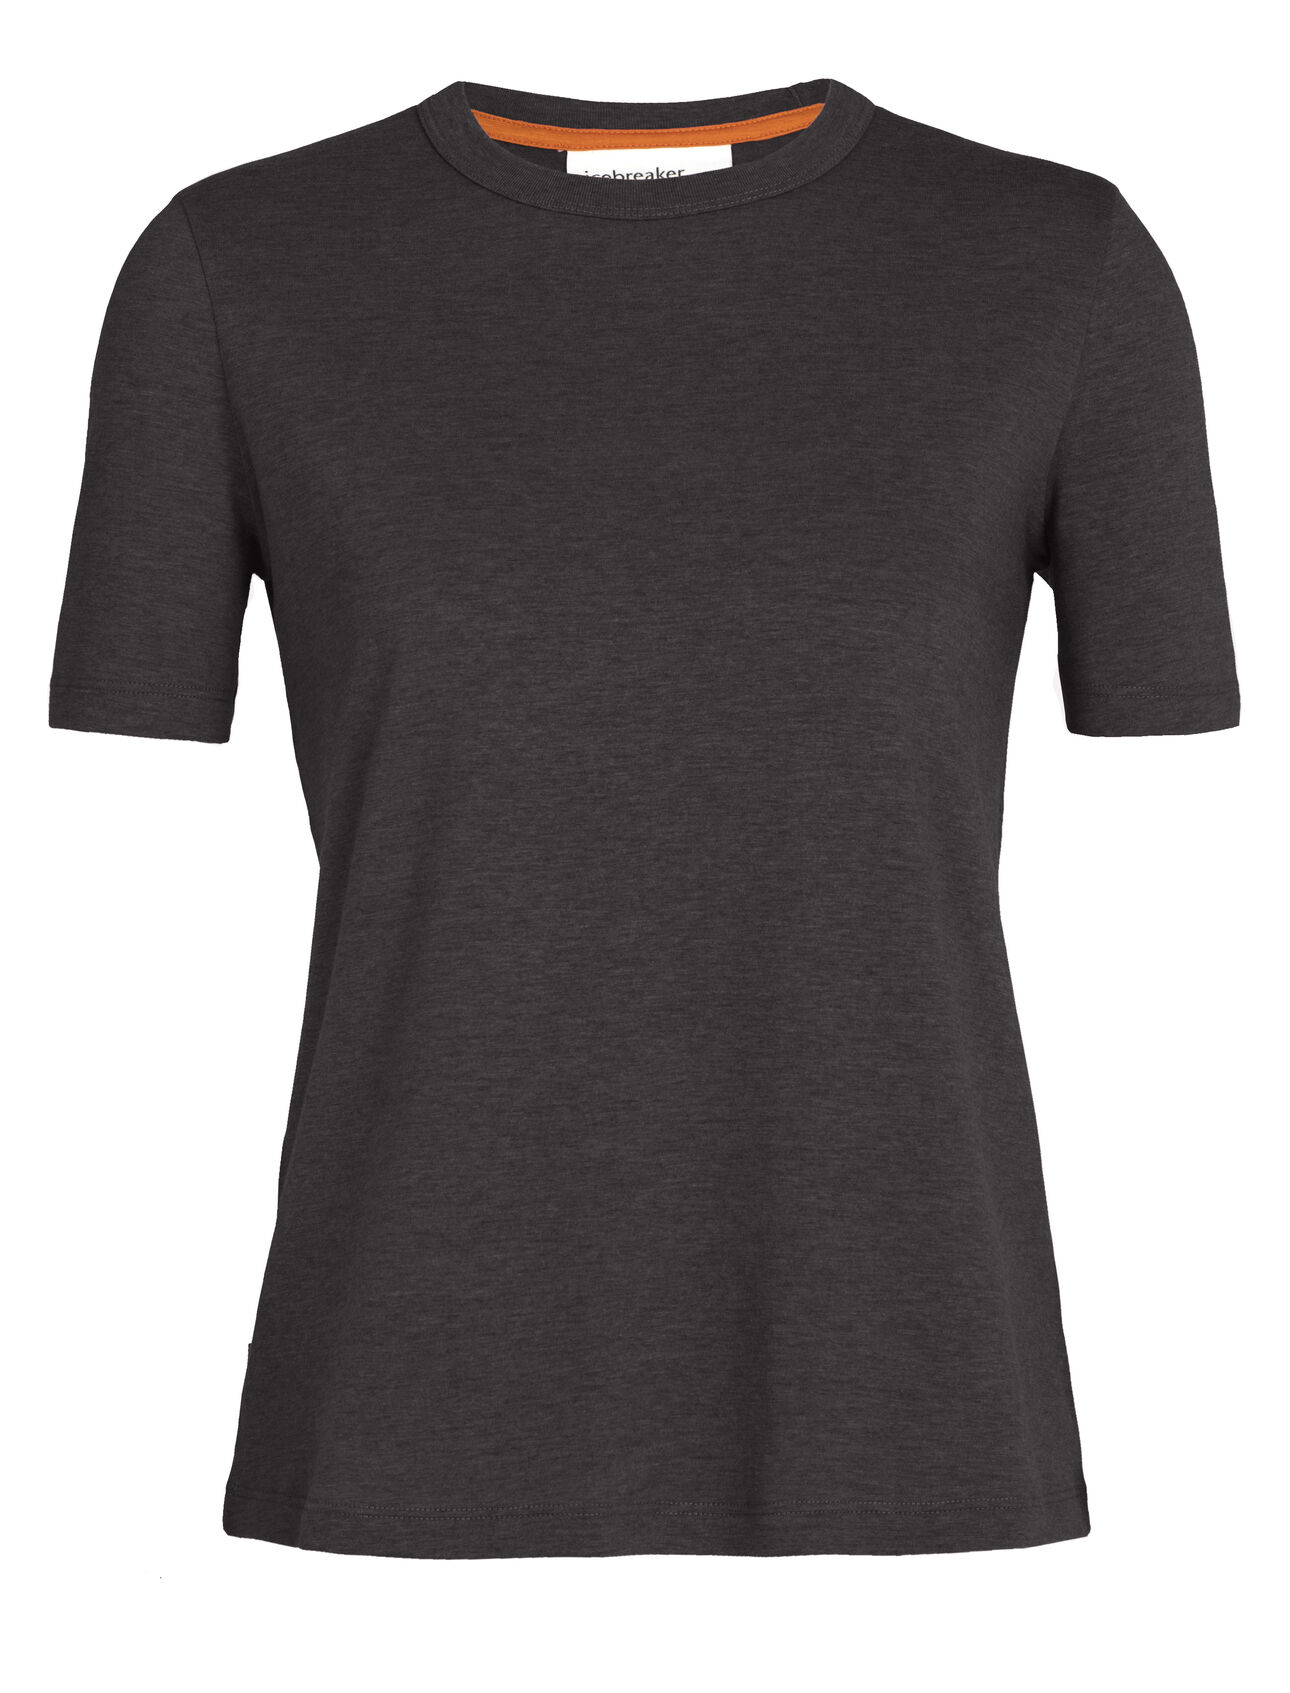 Womens Tencel™  Cotton Short Sleeve T-Shirt A clean and comfortable everyday tee with classic style, the TENCEL™ Cotton Short Sleeve Tee features a super-soft jersey fabric that blends organic cotton with natural TENCEL™.